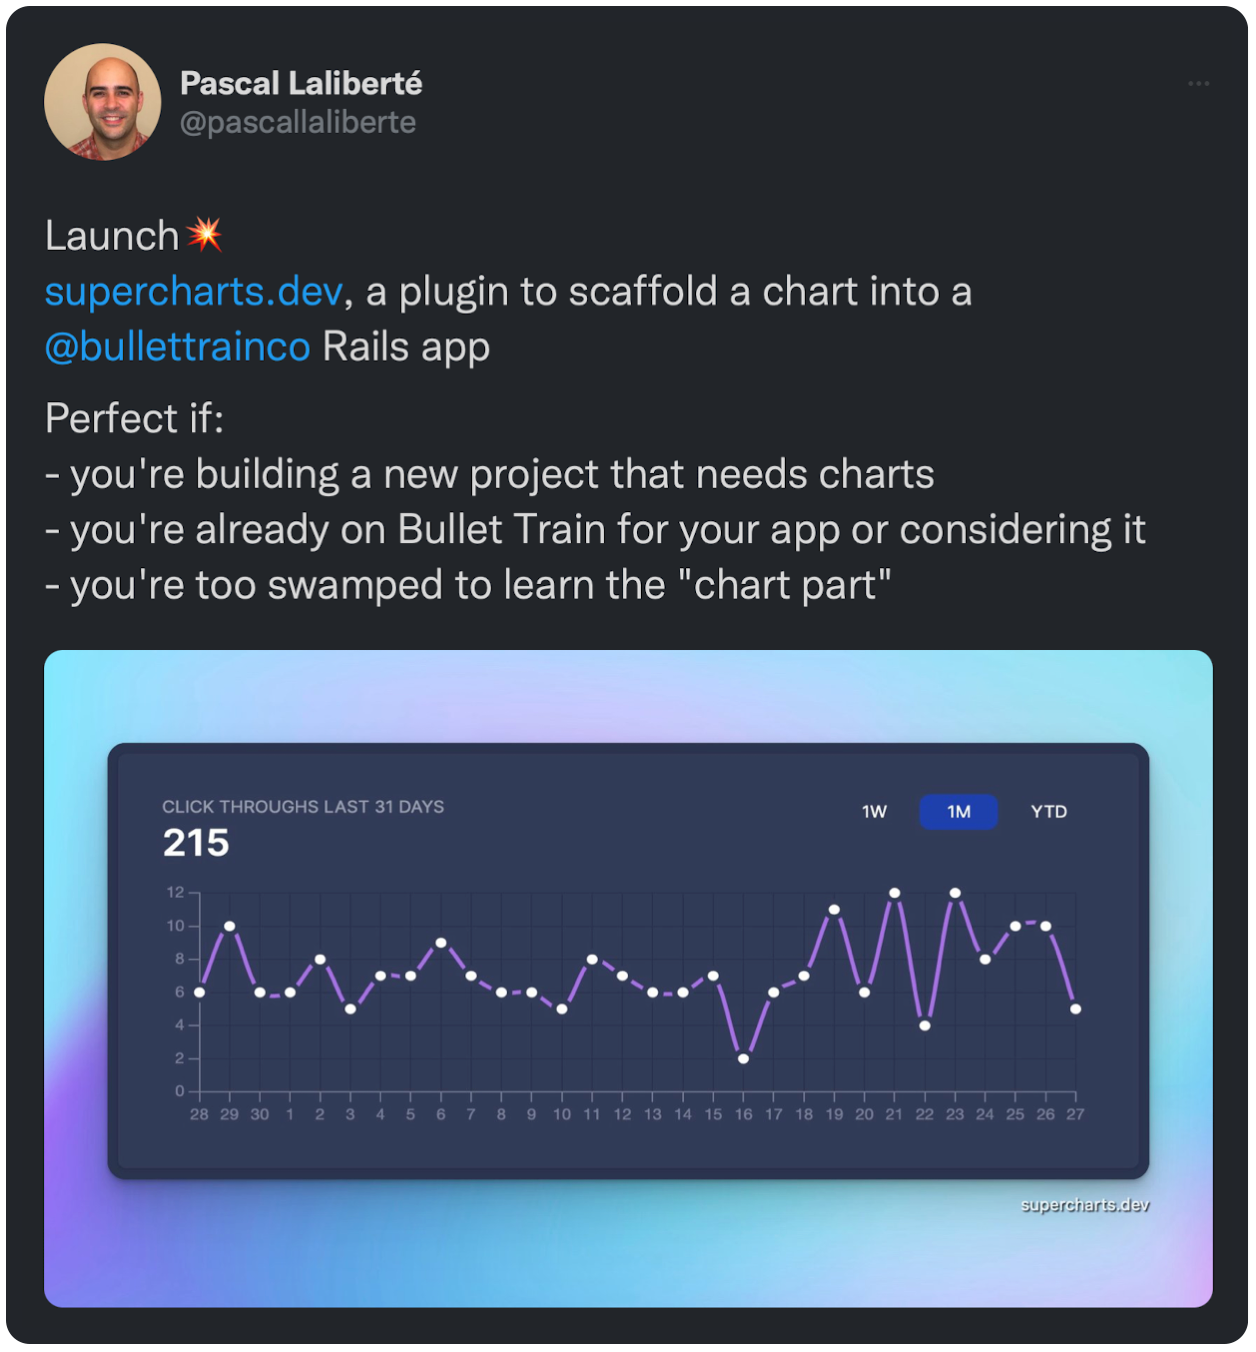 Launch💥 https://t.co/AfDX6B1hjY, a plugin to scaffold a chart into a @bullettrainco Rails app Perfect if: - you're building a new project that needs charts - you're already on Bullet Train for your app or considering it - you're too swamped to learn the "chart part"